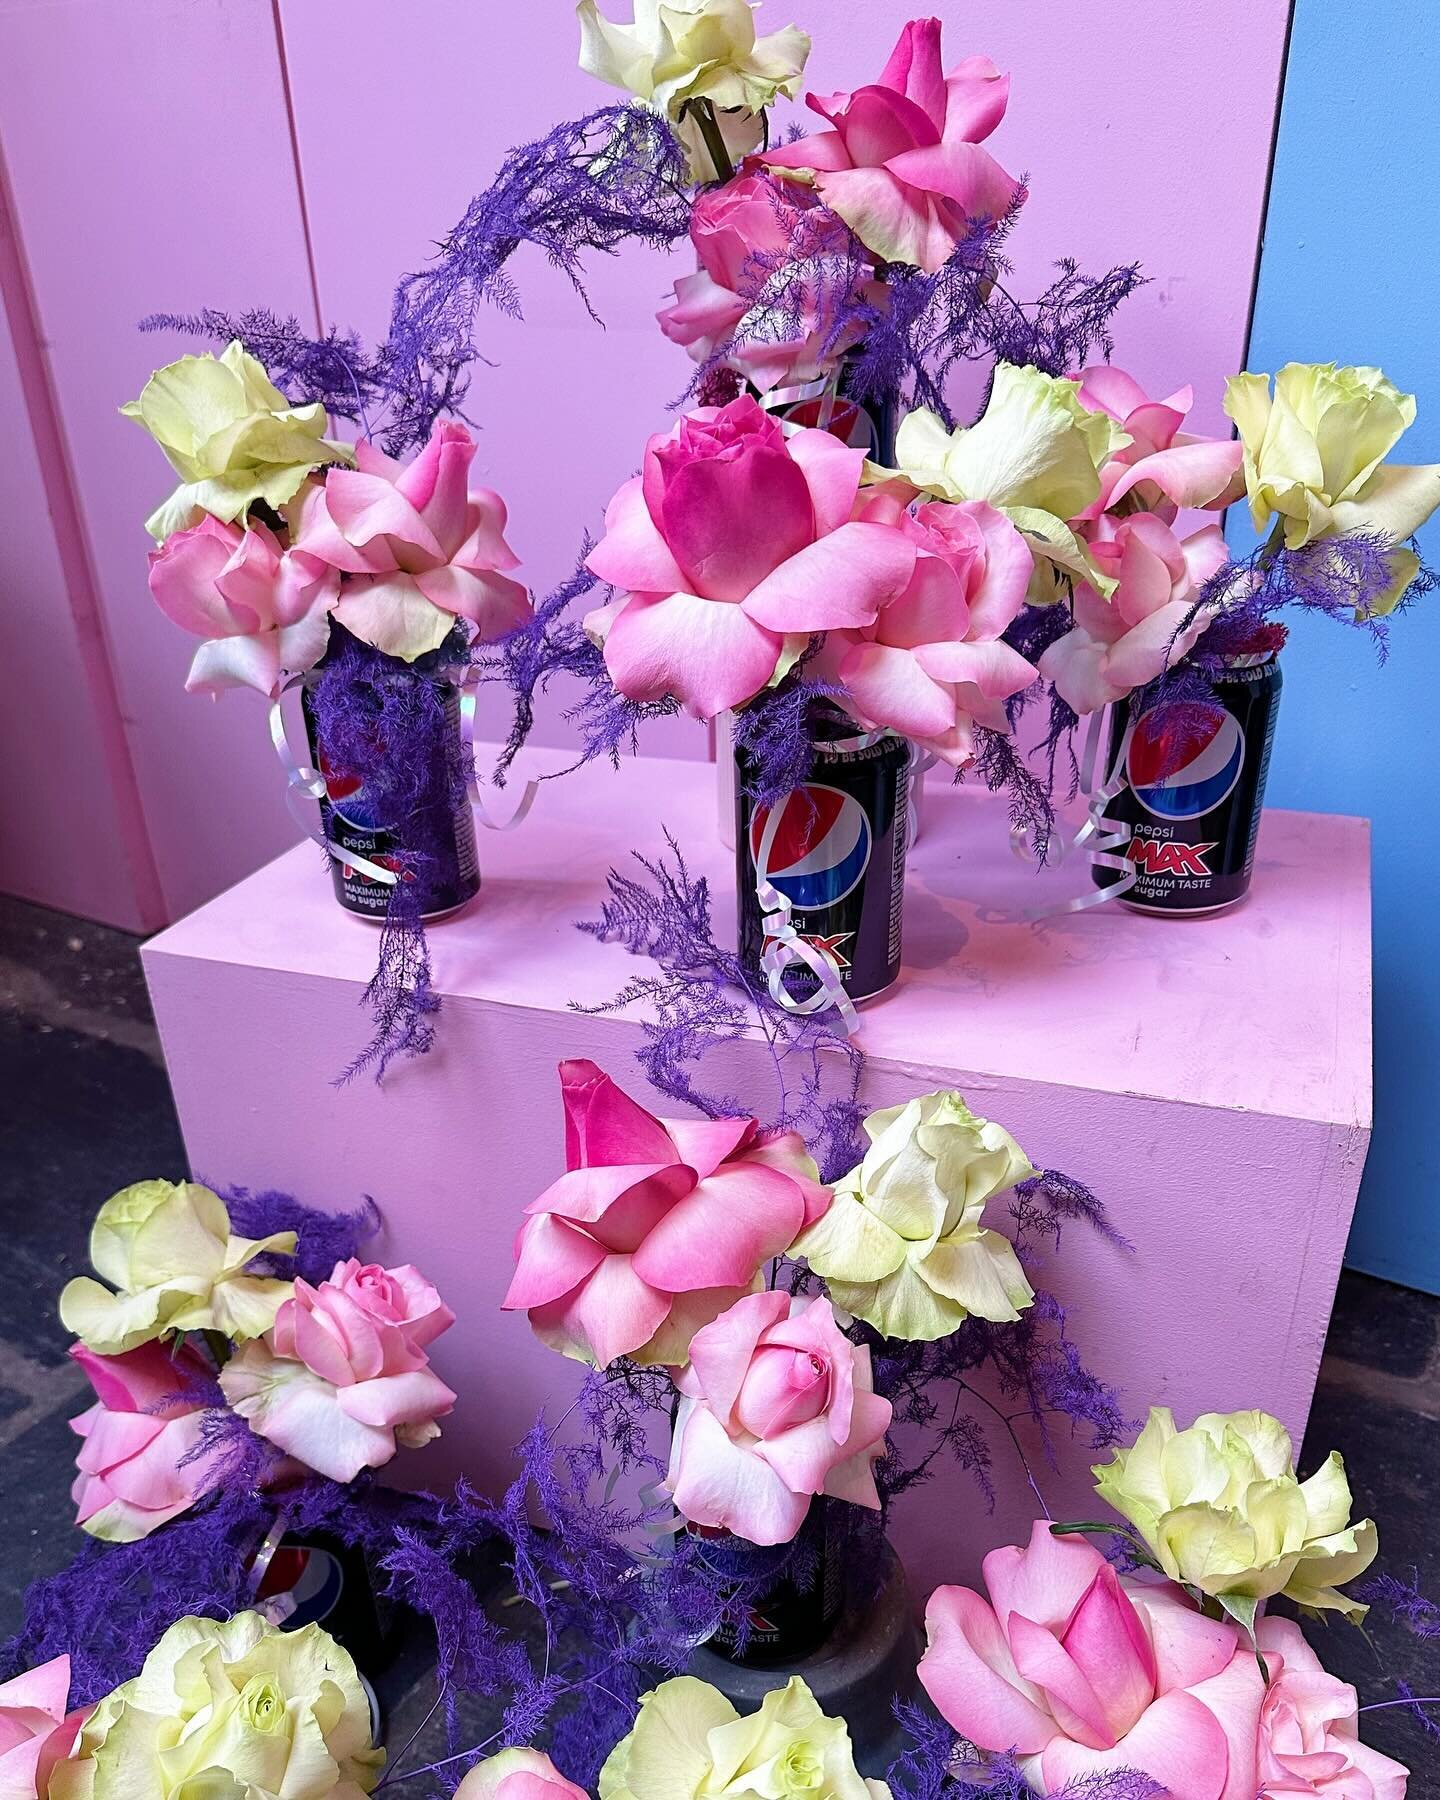 for the love of flowers, I have drank too much pepsi